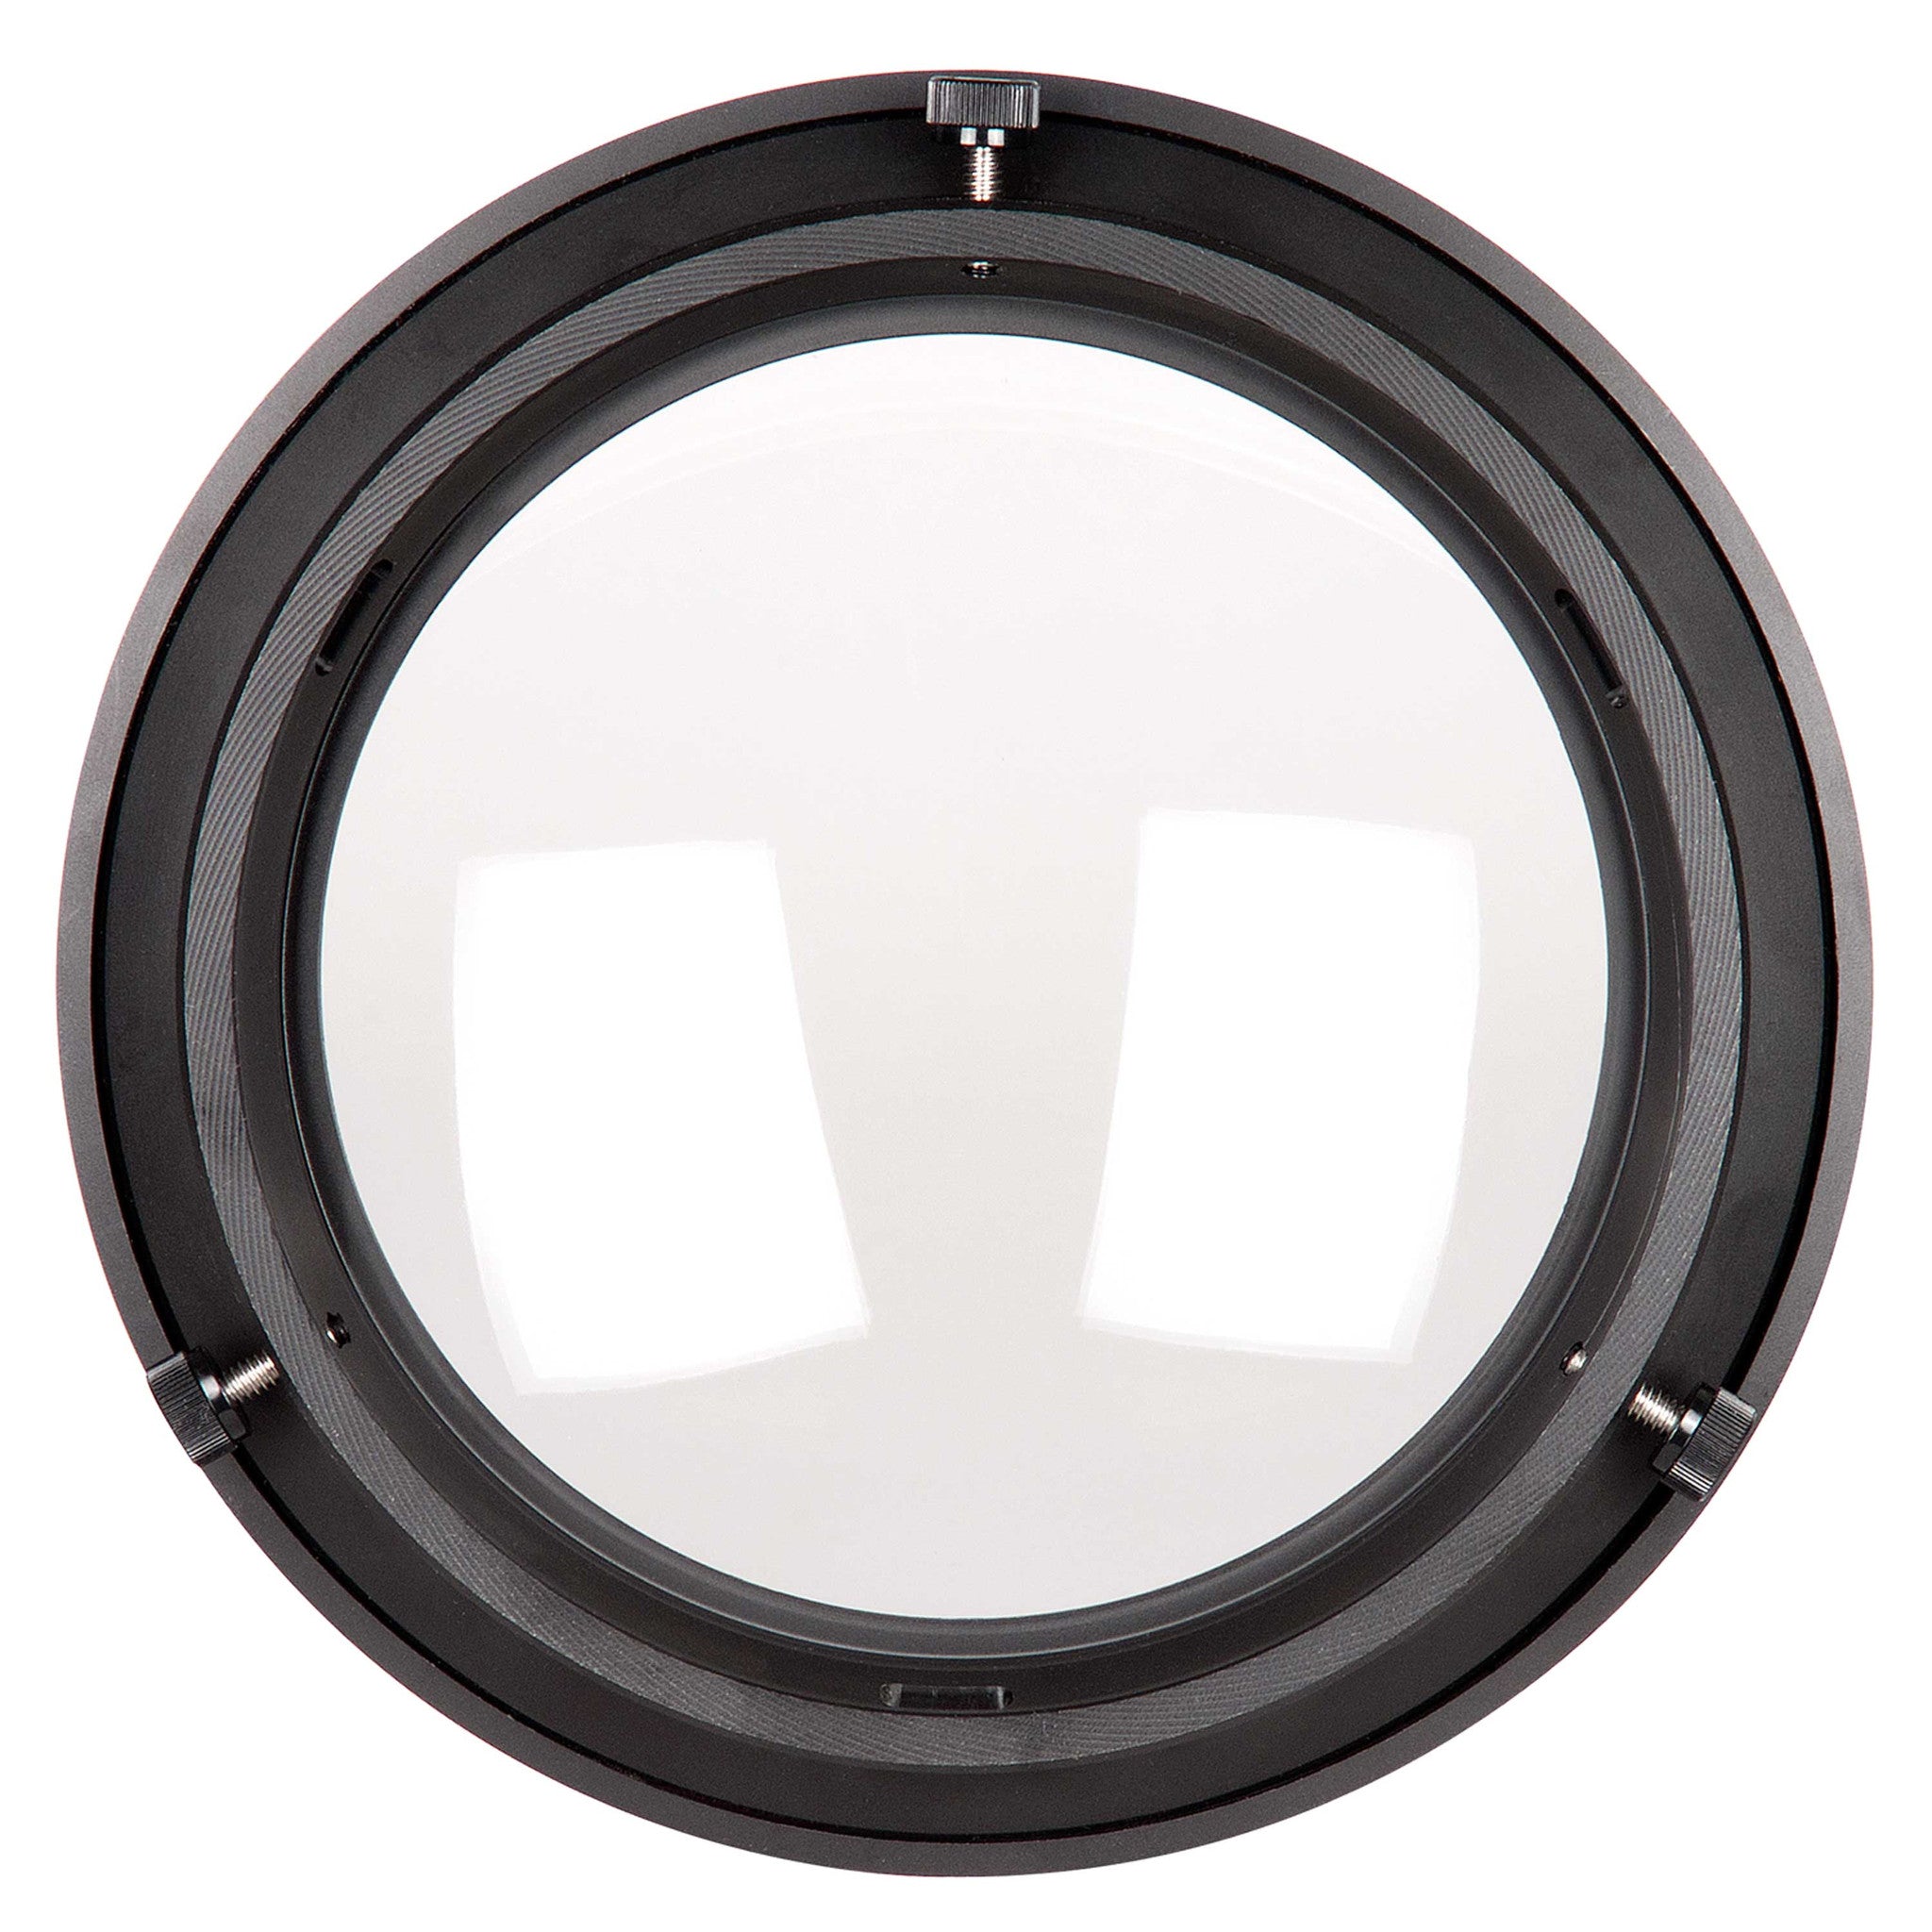 75344 DL Compact 8 inch Dome Port